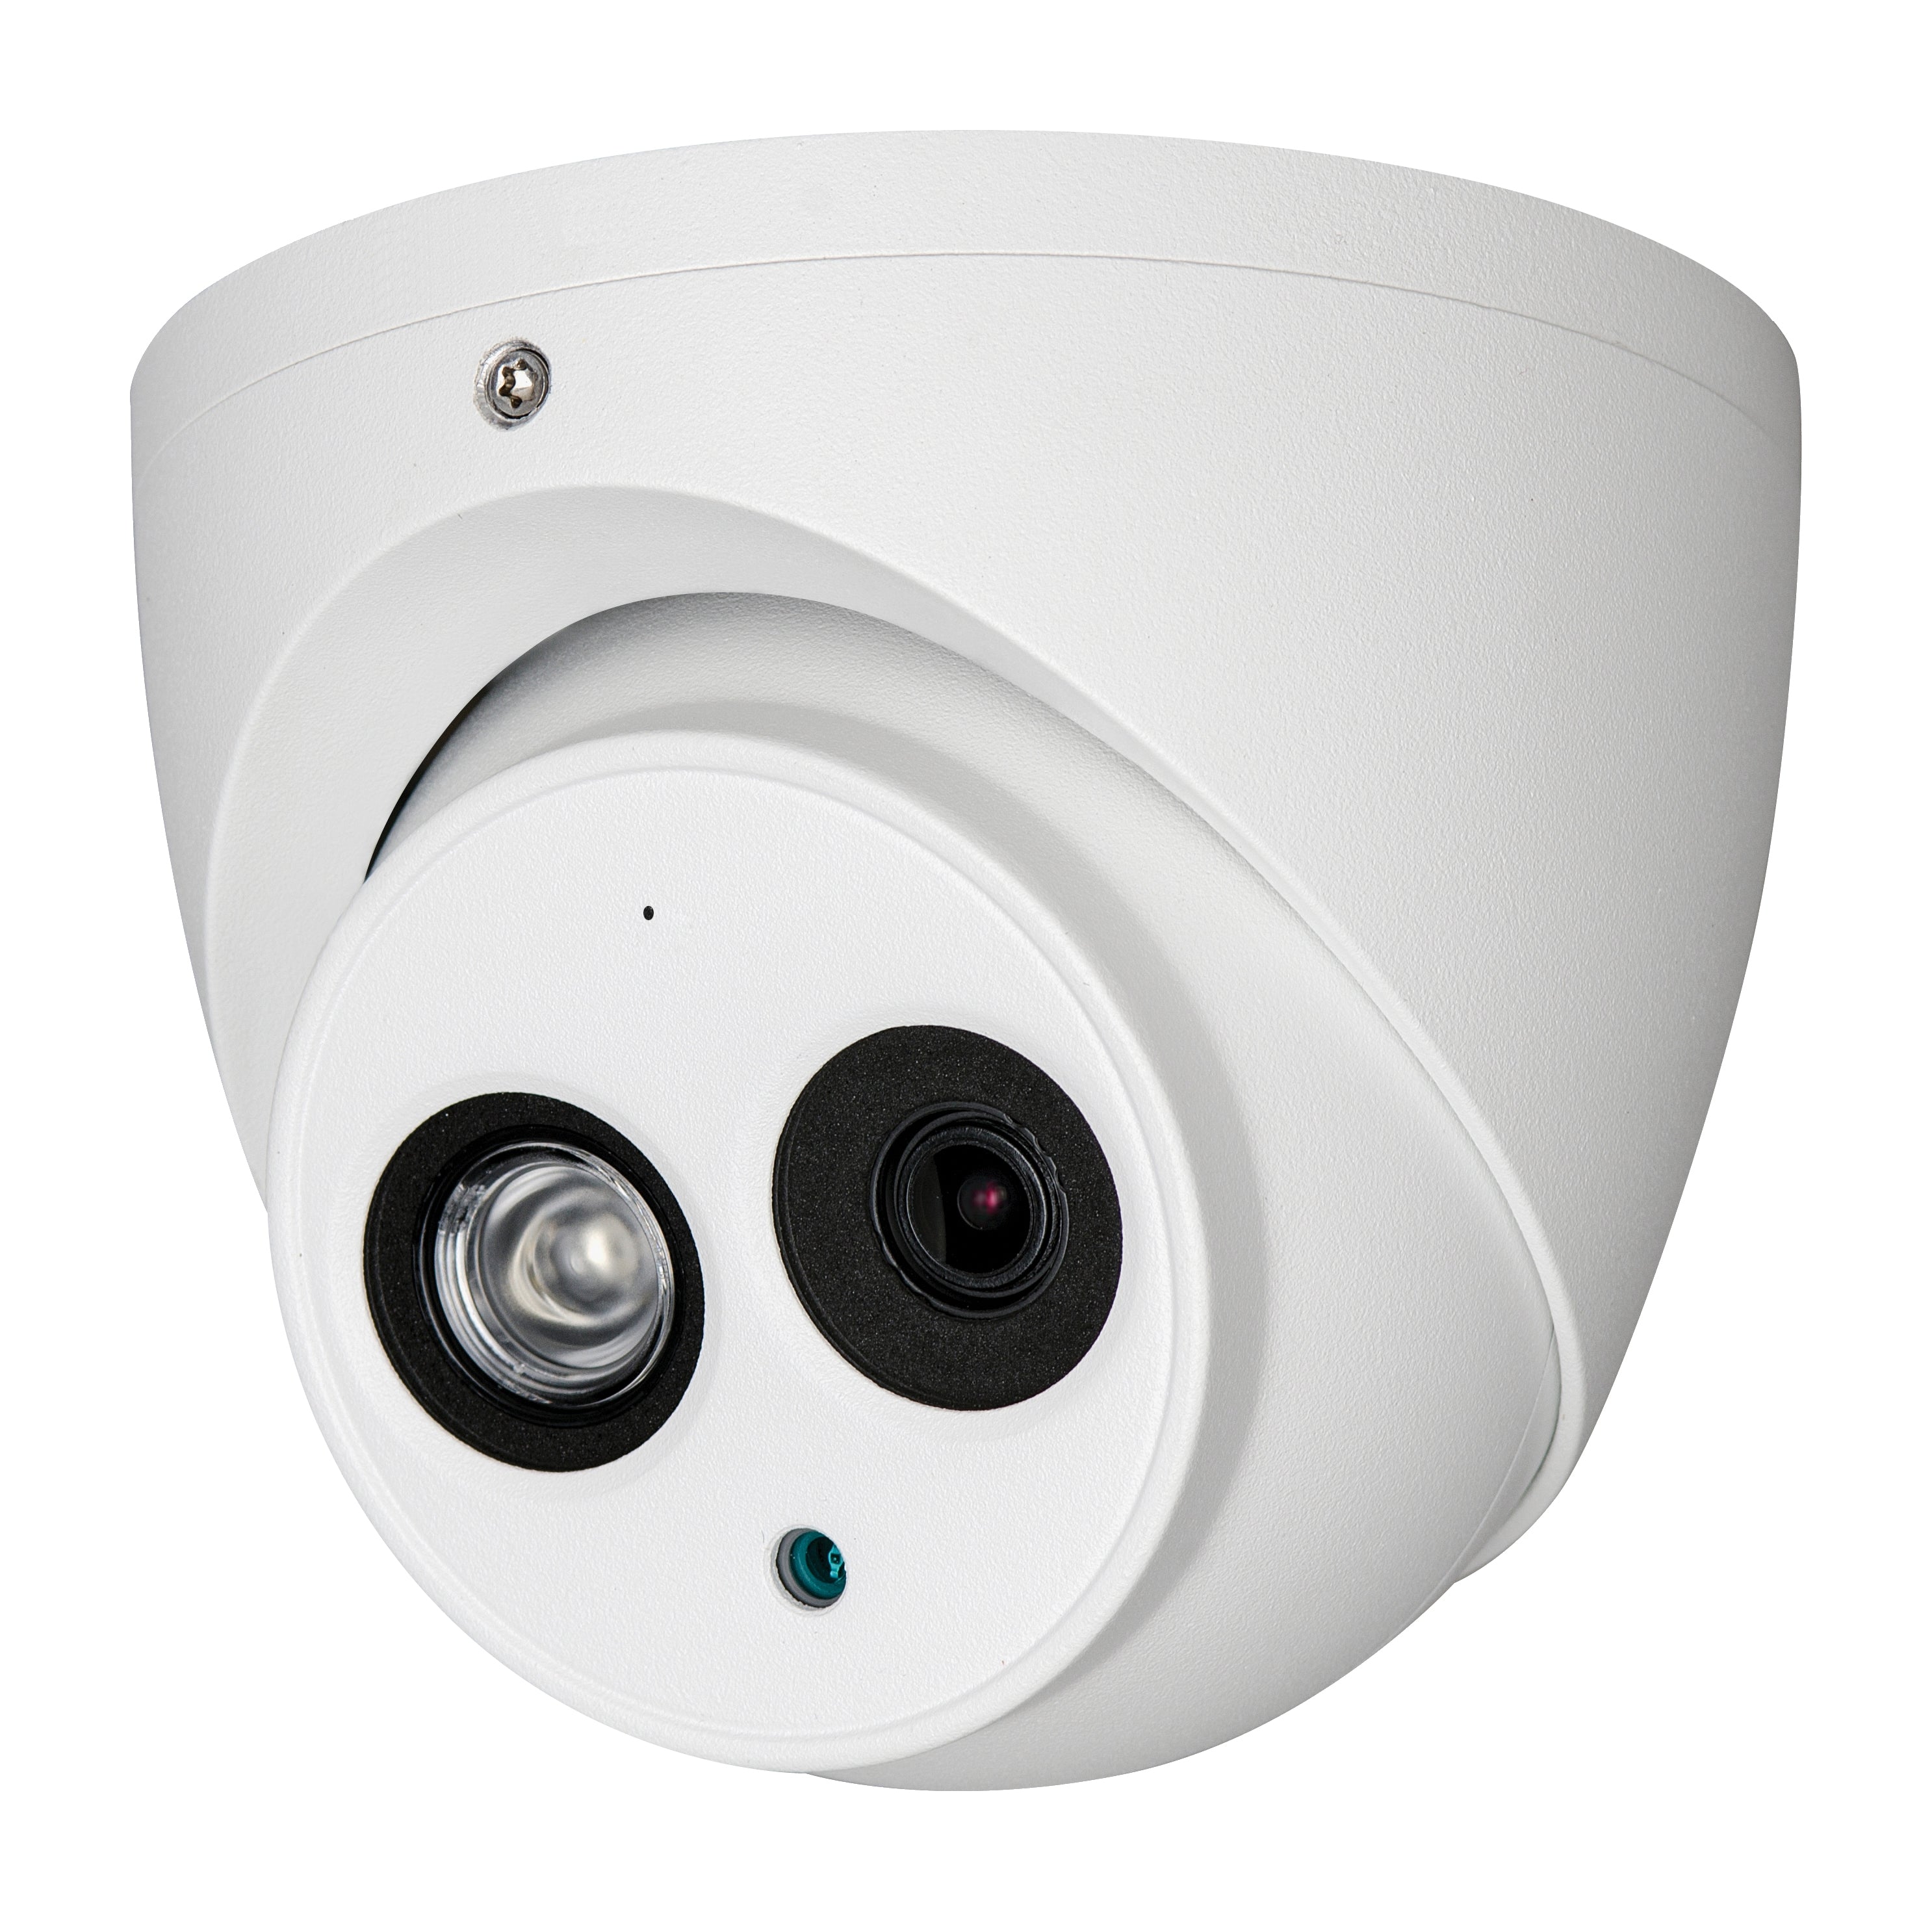 23-4D48A31EM-AS 4K WDR IR Eyeball Face Detection Network Camera with Built-in MicroSD Card Slot & Mic